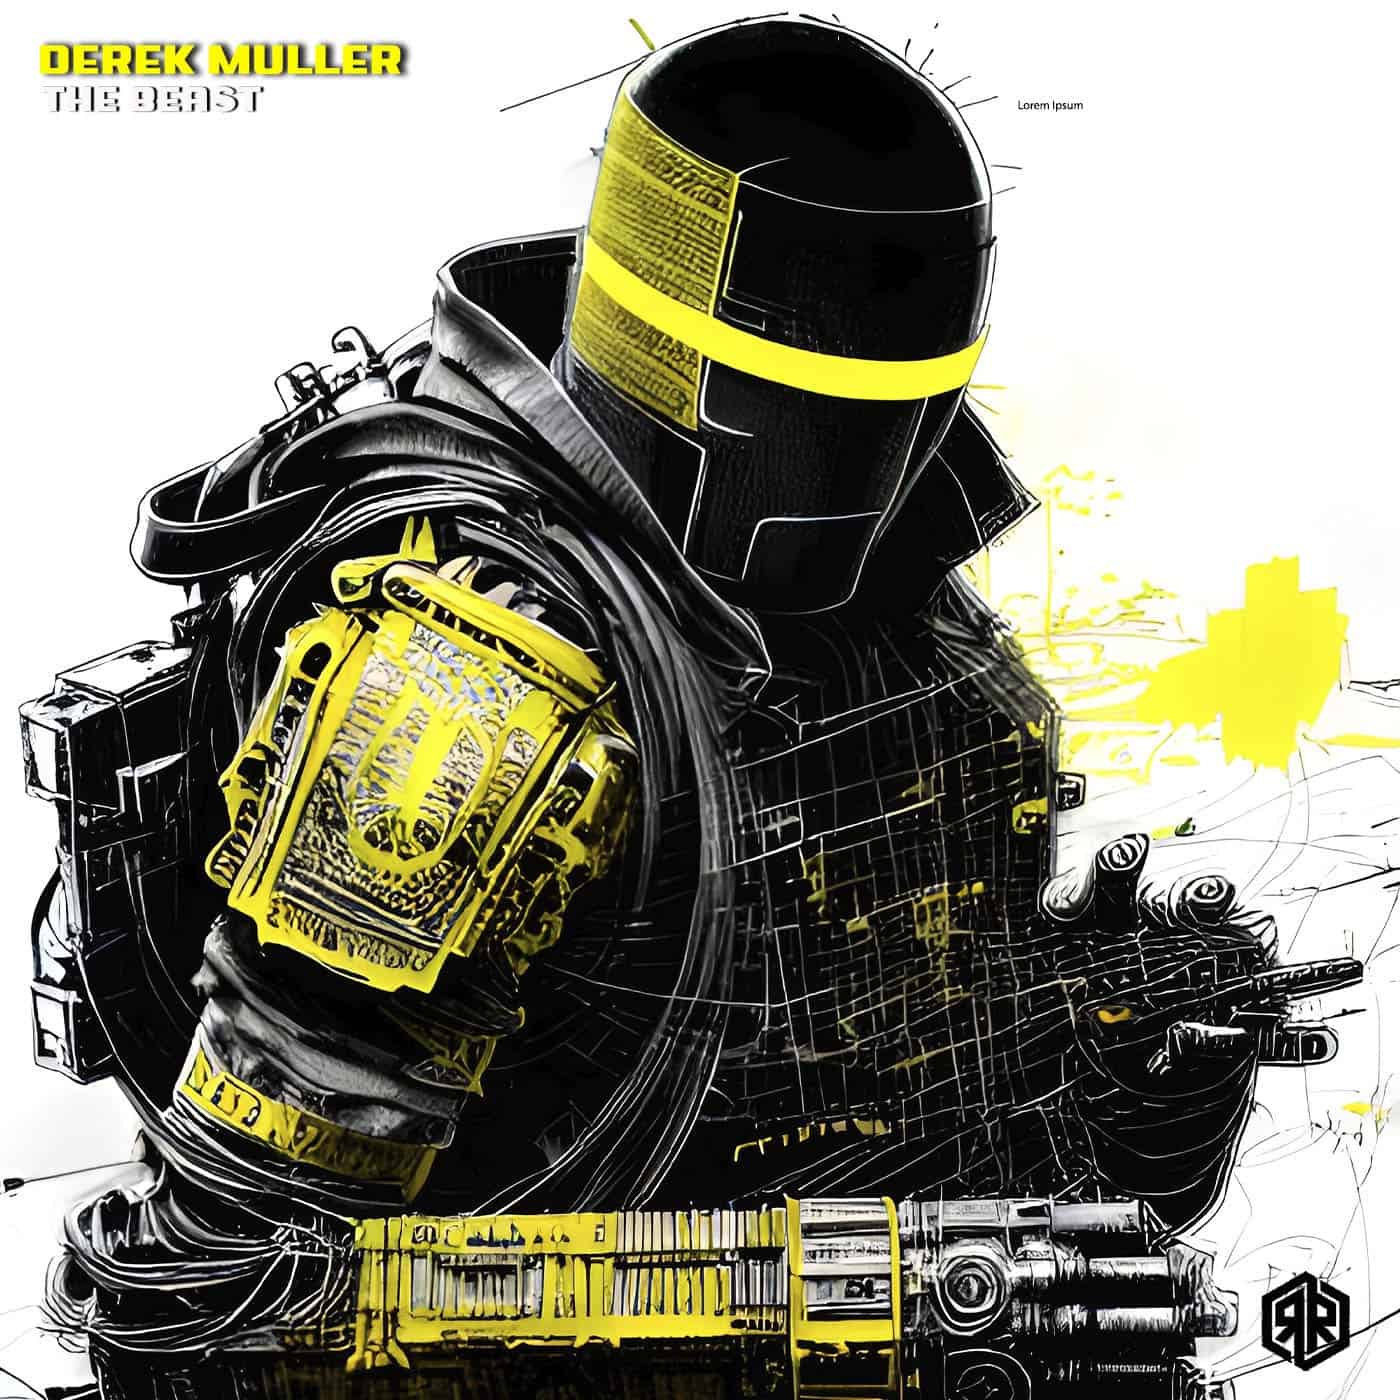 image cover: The Beast by Derek Muller on Reload Records